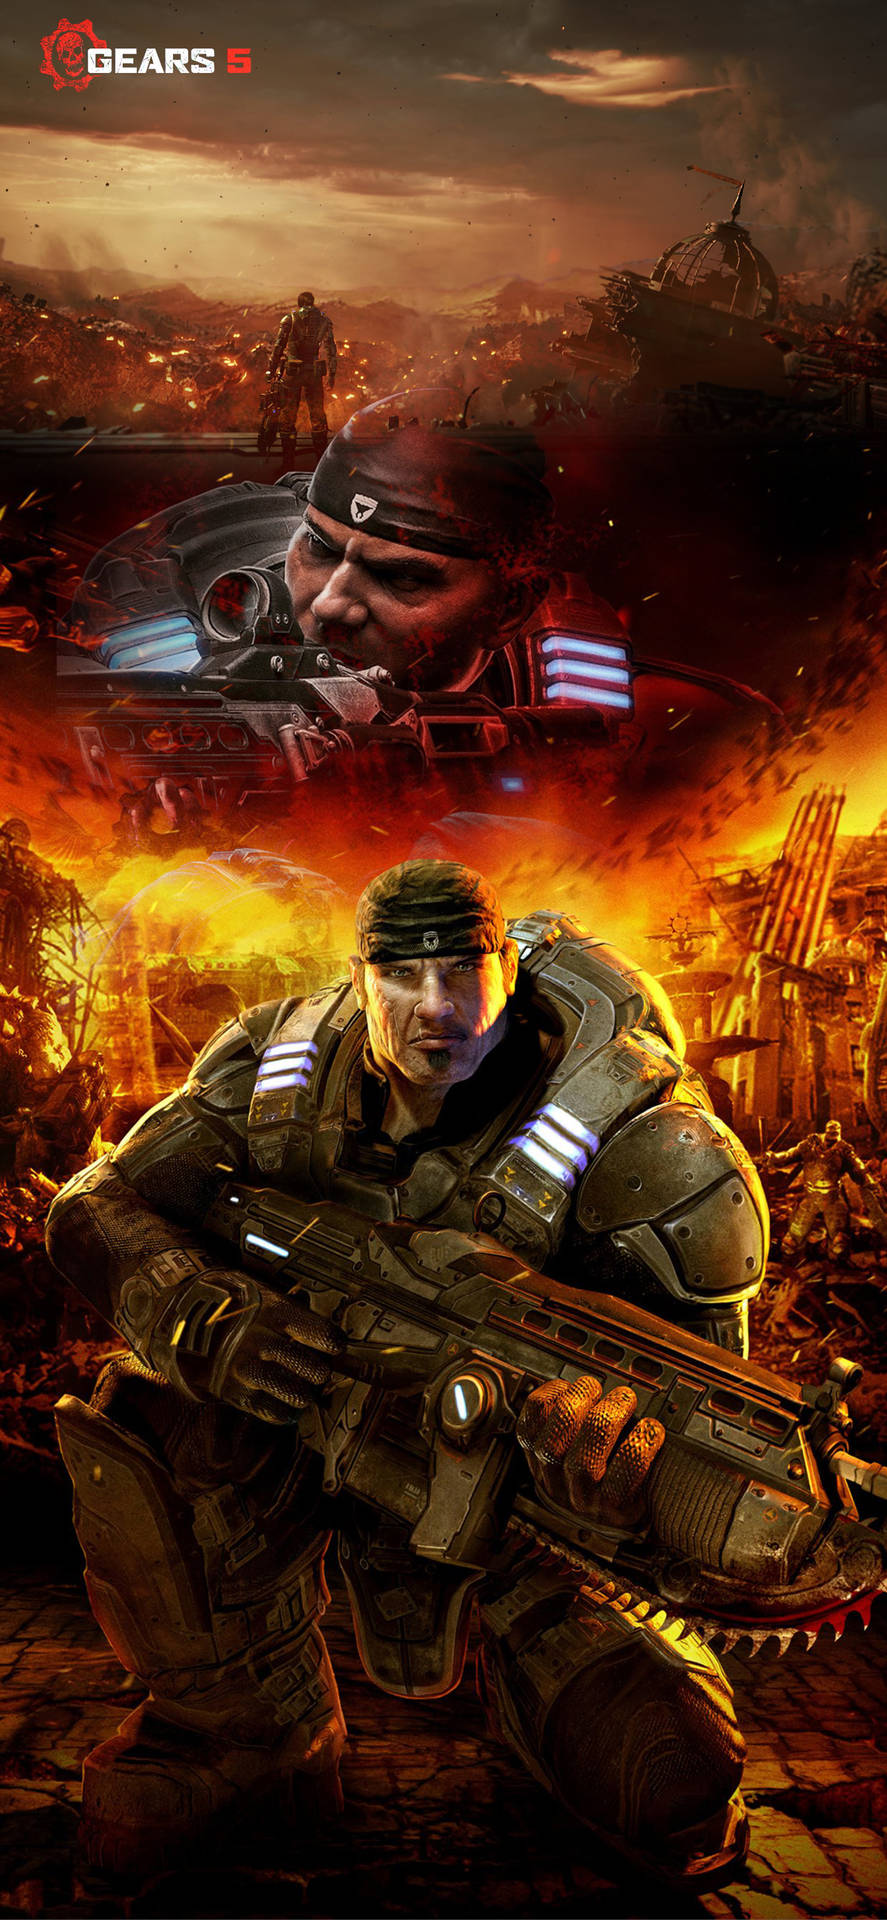 Marcus And Batista Holding Guns Gears 5 iPhone Wallpaper